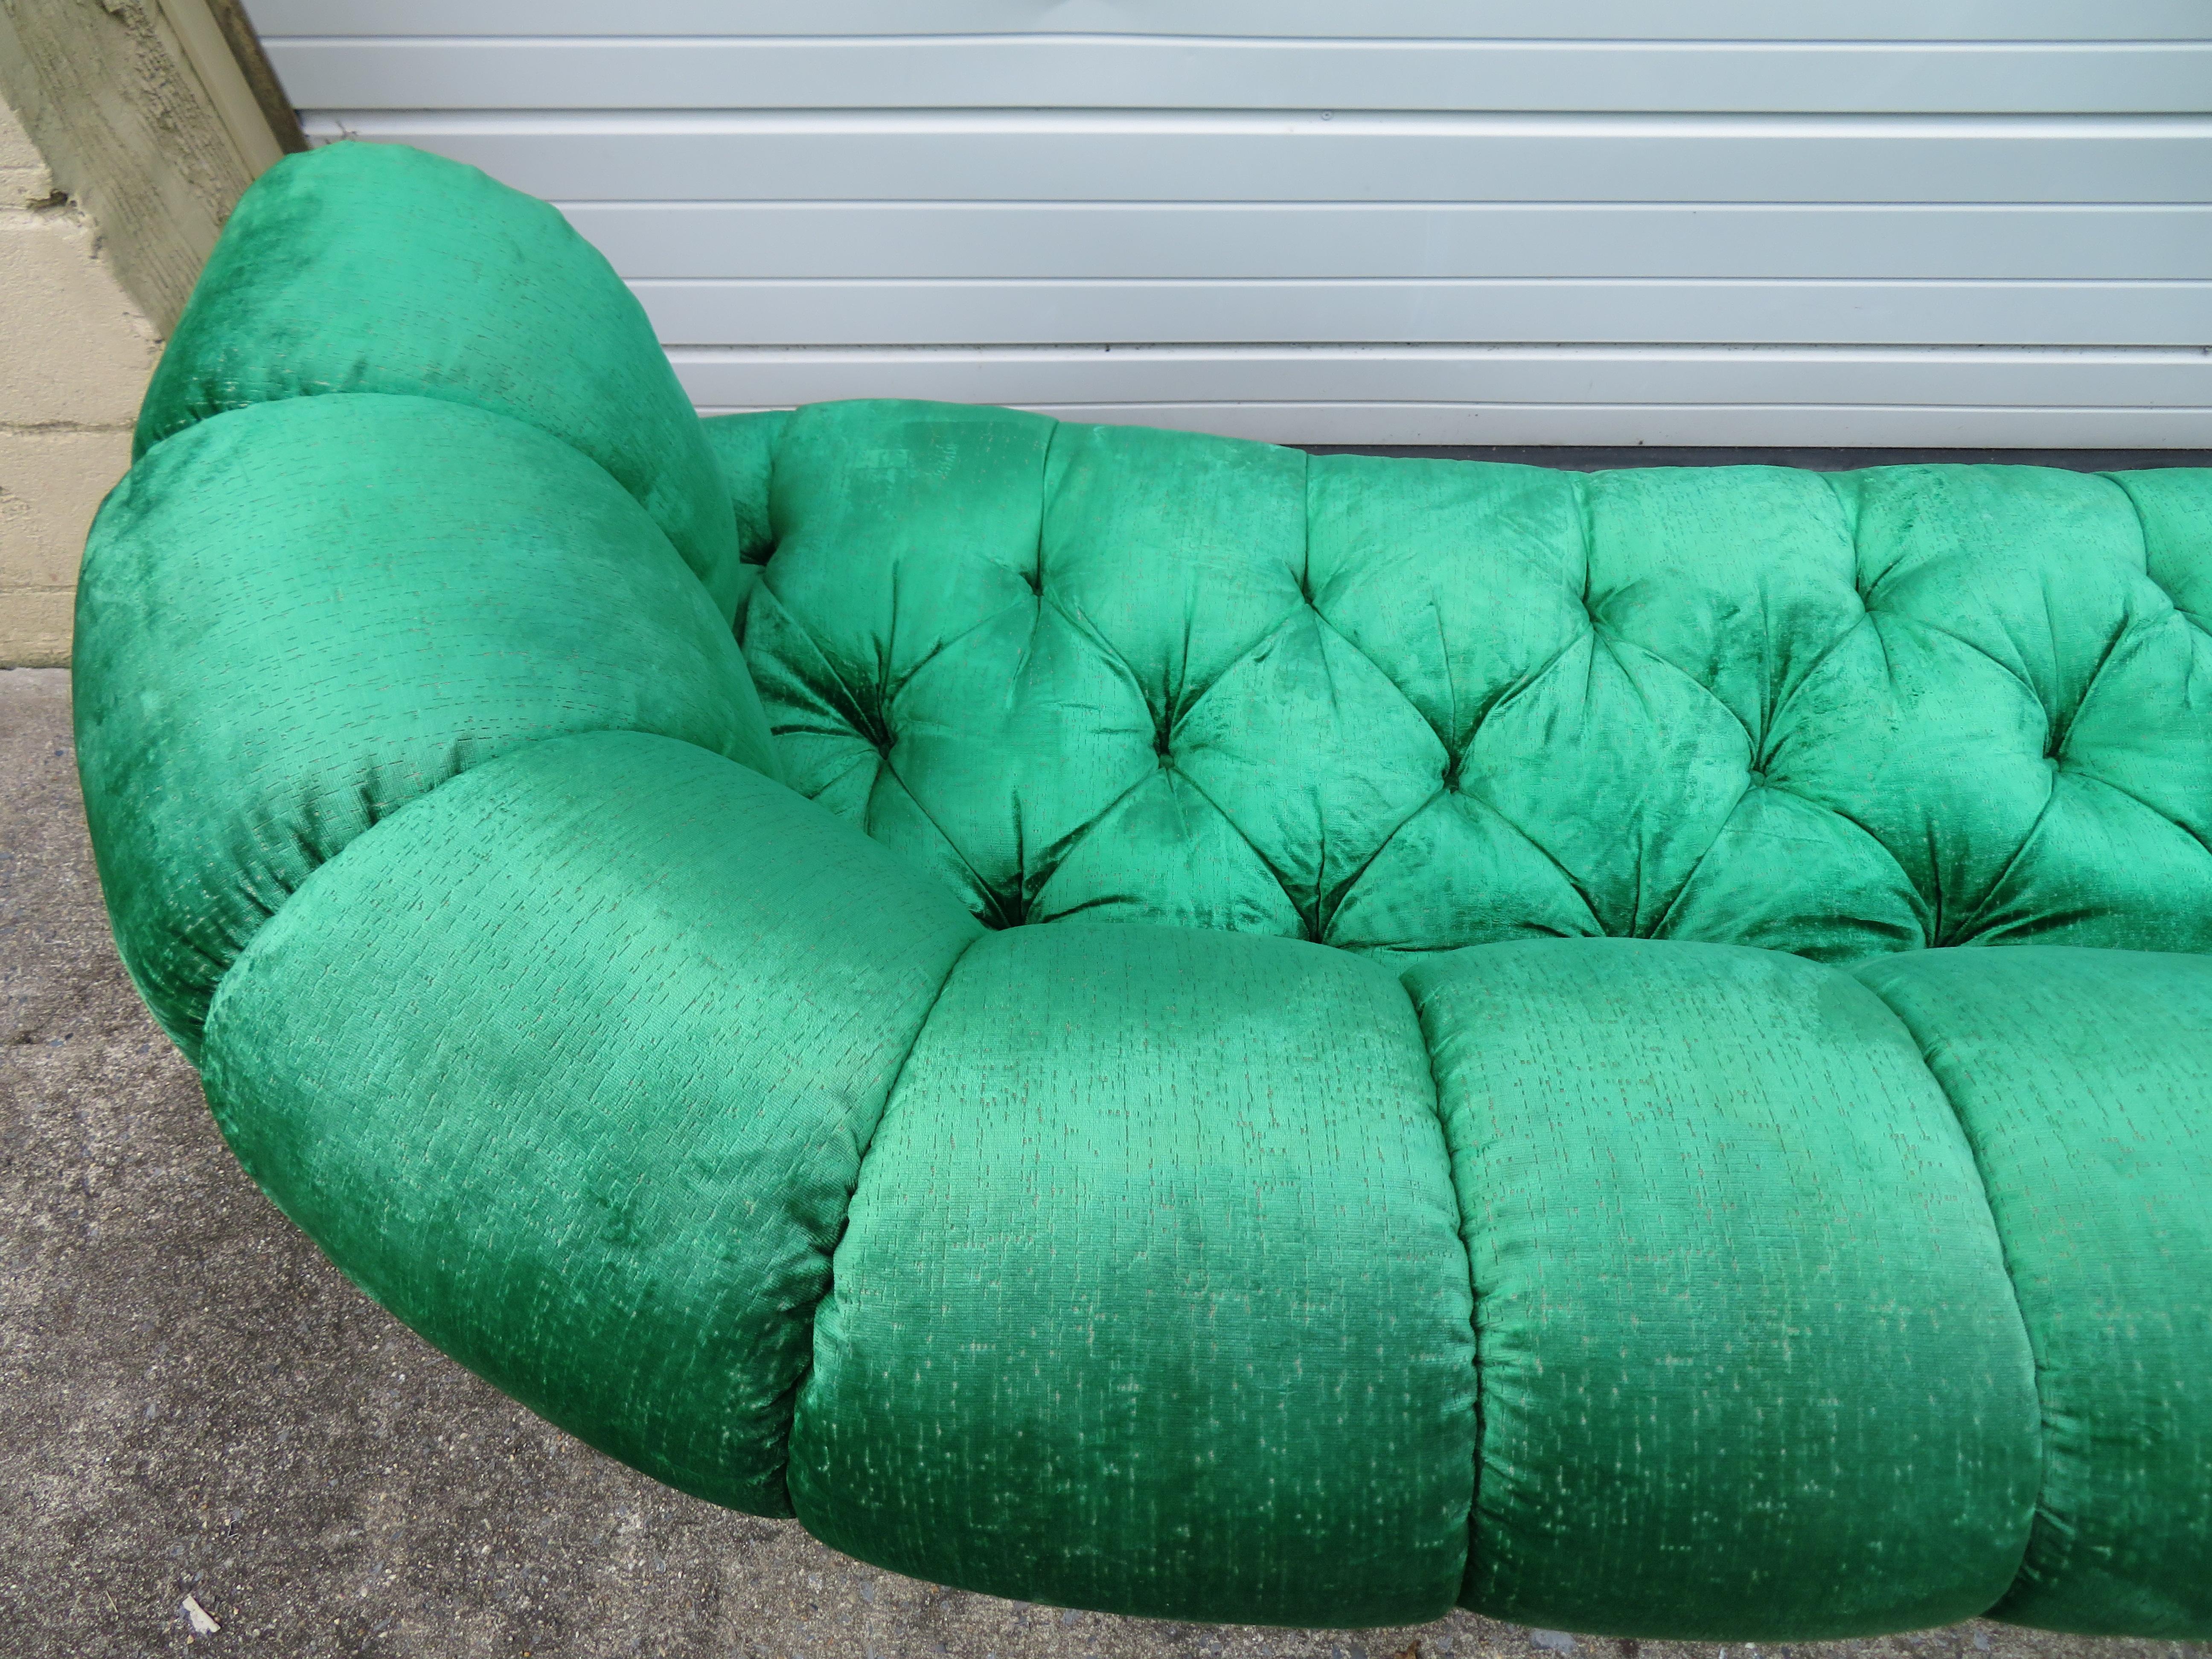 Upholstery Spectacular Hollywood Regency Tufted Curved Kidney Sofa For Sale